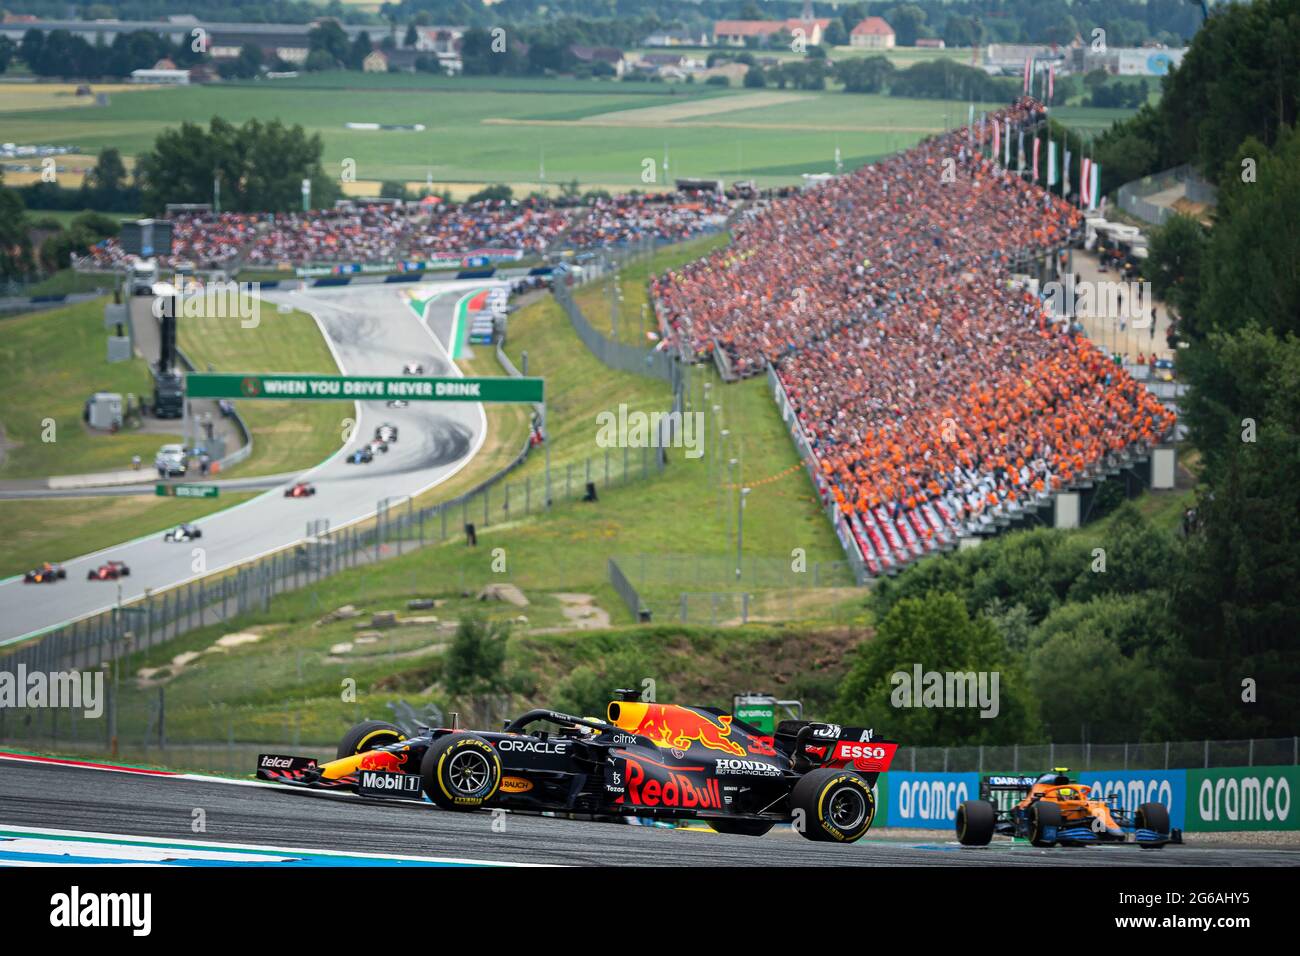 Spielberg Austria 04th July 21 Red Bull Racing S Dutch Driver Max Verstappen Competes During The Austrian F1 Grand Prix Race At The Red Bull Ring In Spielberg Credit Sopa Images Limited Alamy Live